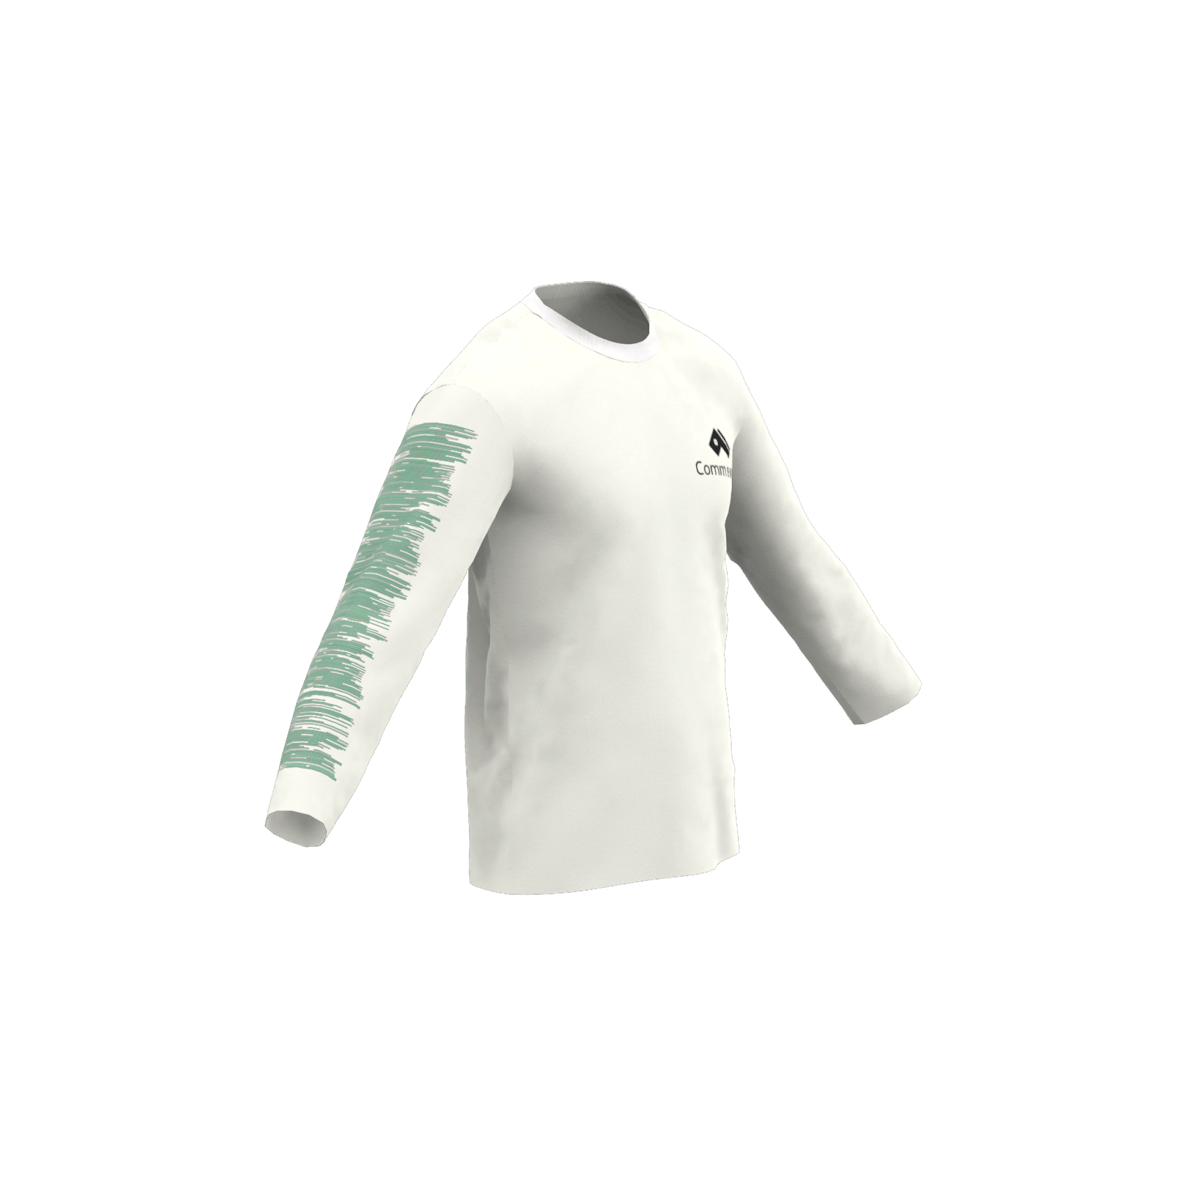 White tee 2 (1).png